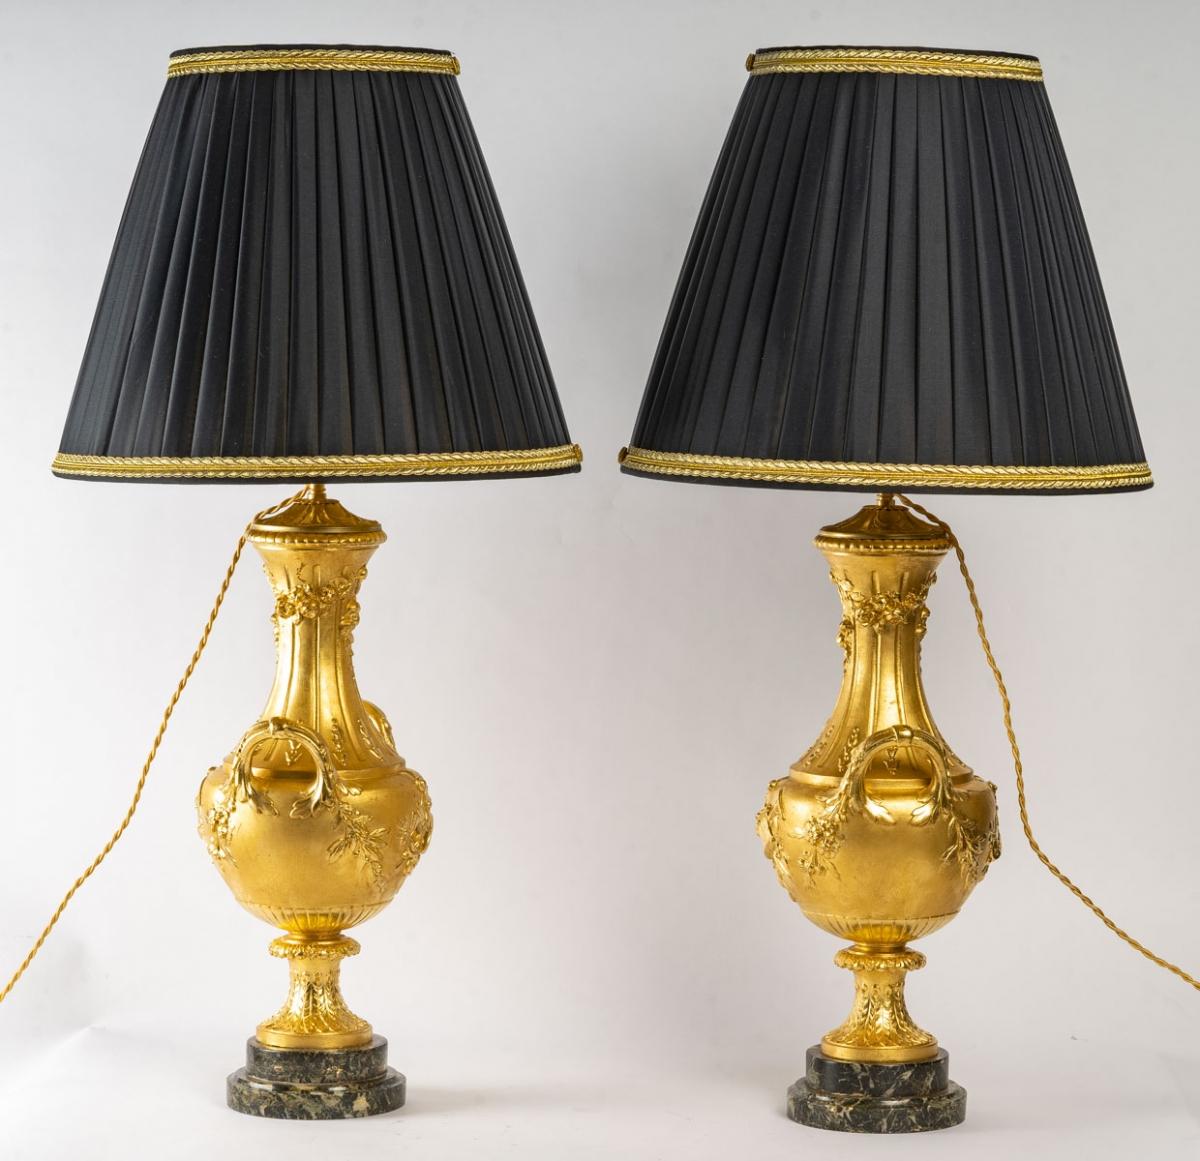 Late 19th Century Pair of Bronze Gilt Leaf Lamps